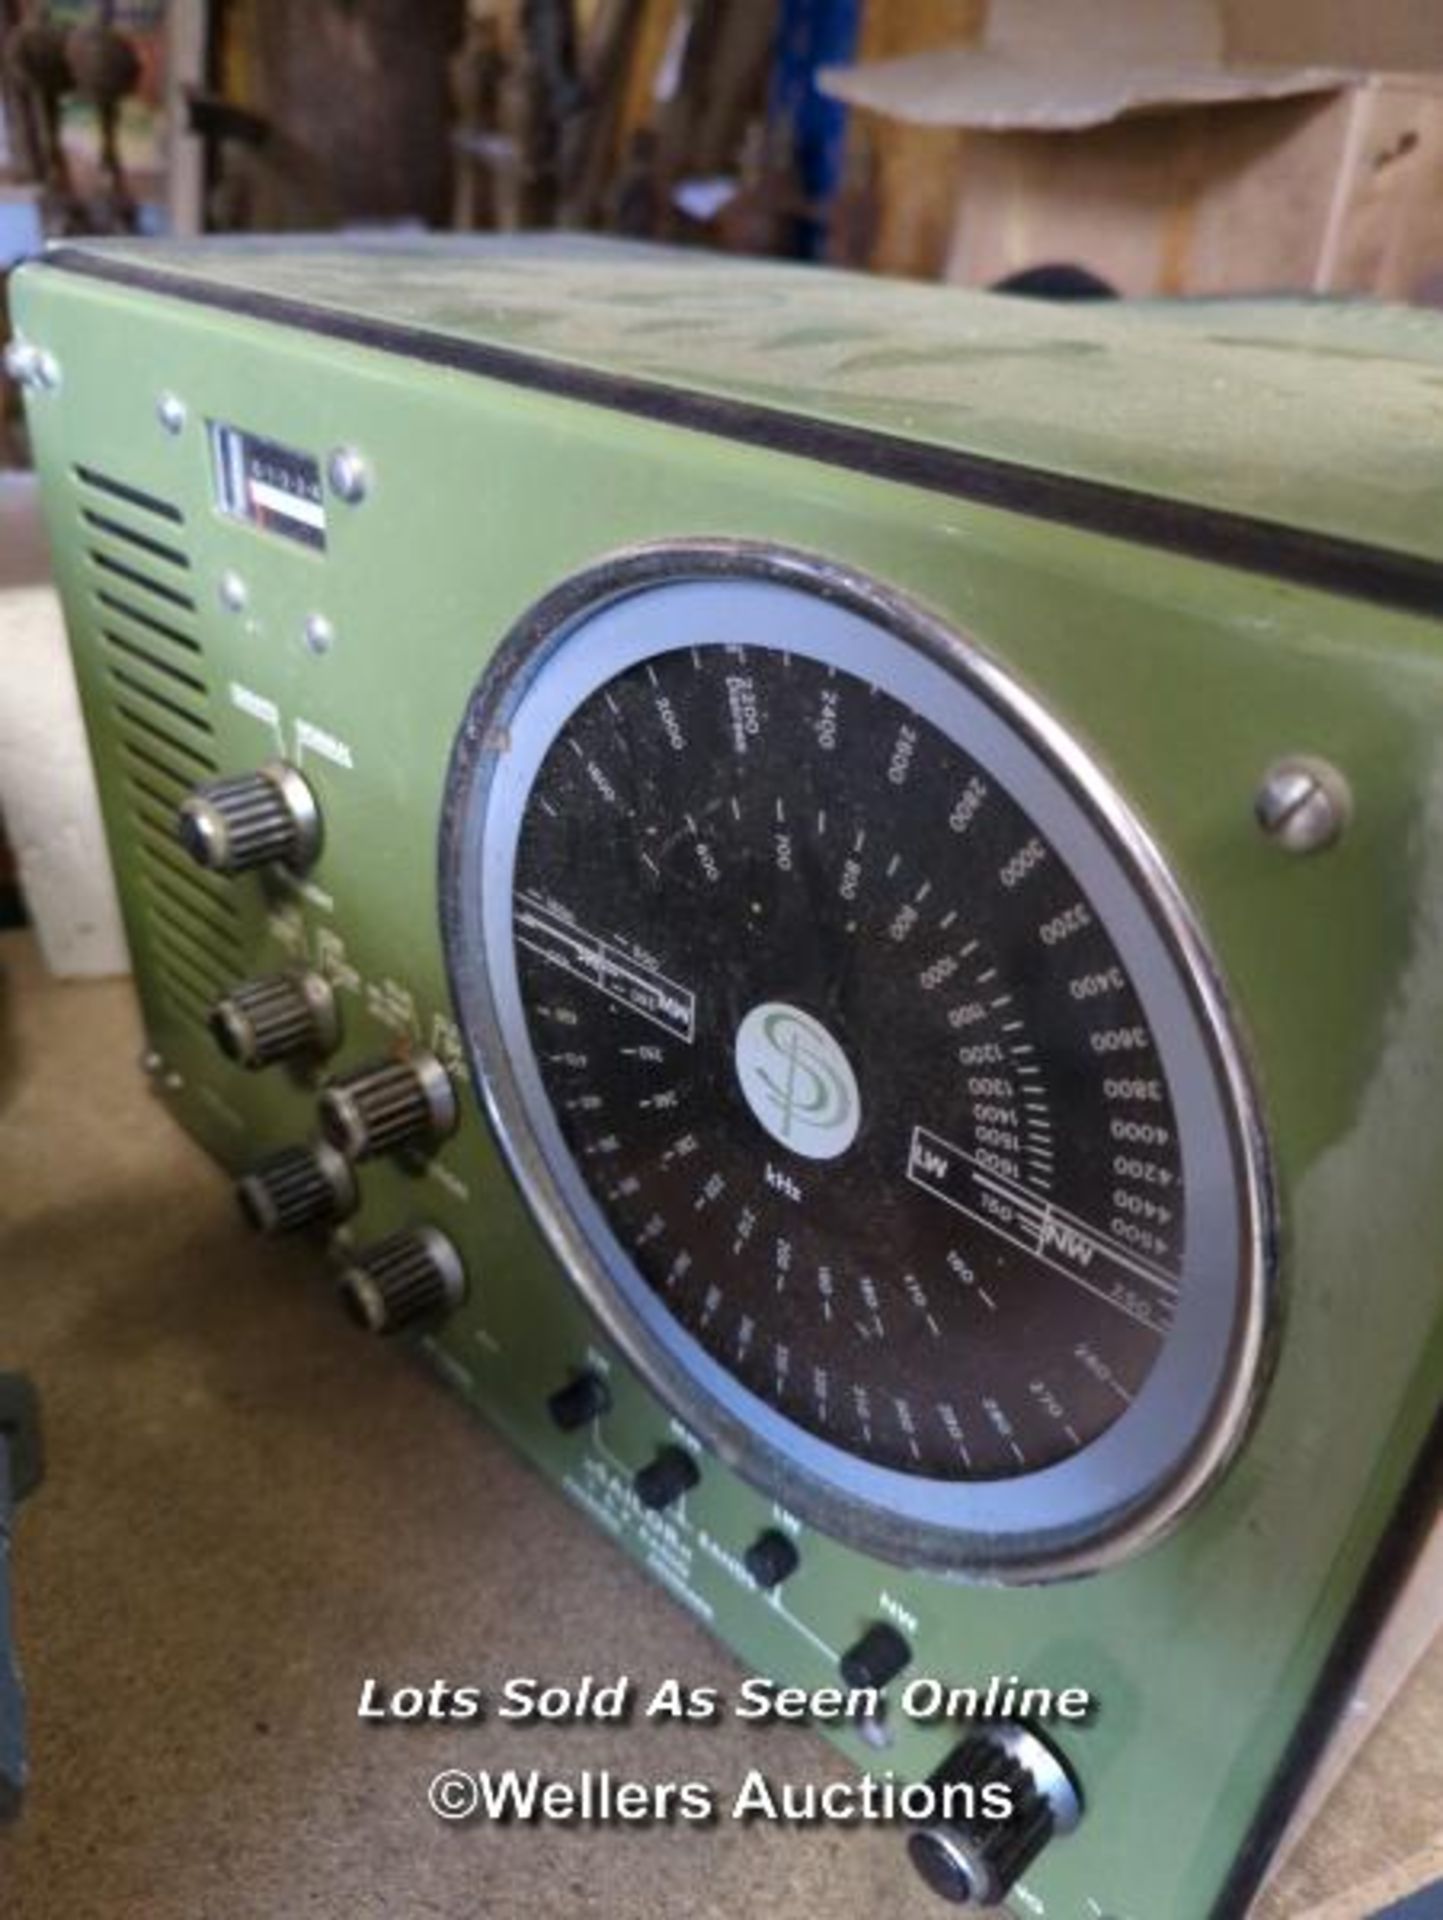 *VINTAGE SAILOR A/S SP RADIO, TYPE: R108 / ALL LOTS ARE LOCATED AT AUTHENTIC RECLAMATION TN5 7EF - Image 2 of 3